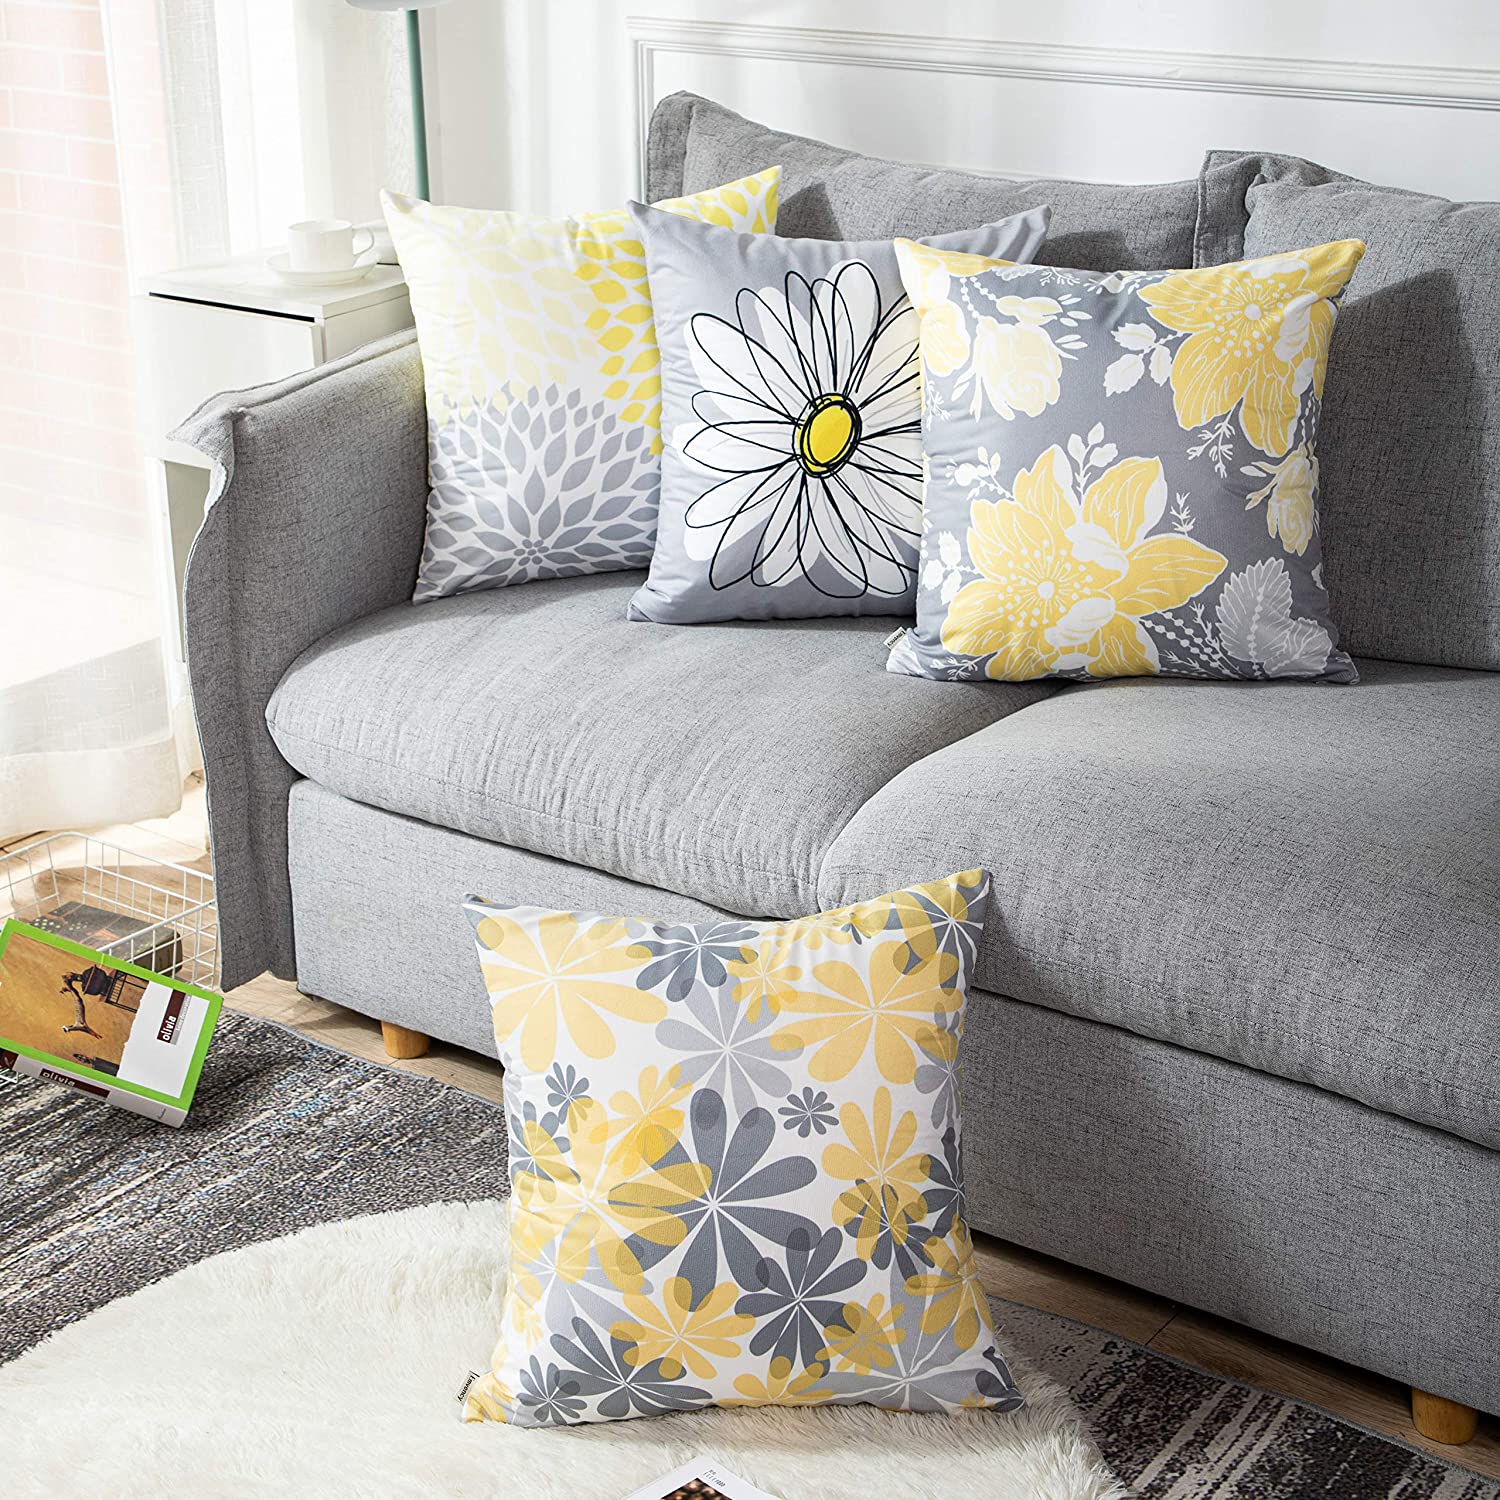 Daisy-Floral-Pillow-Covers